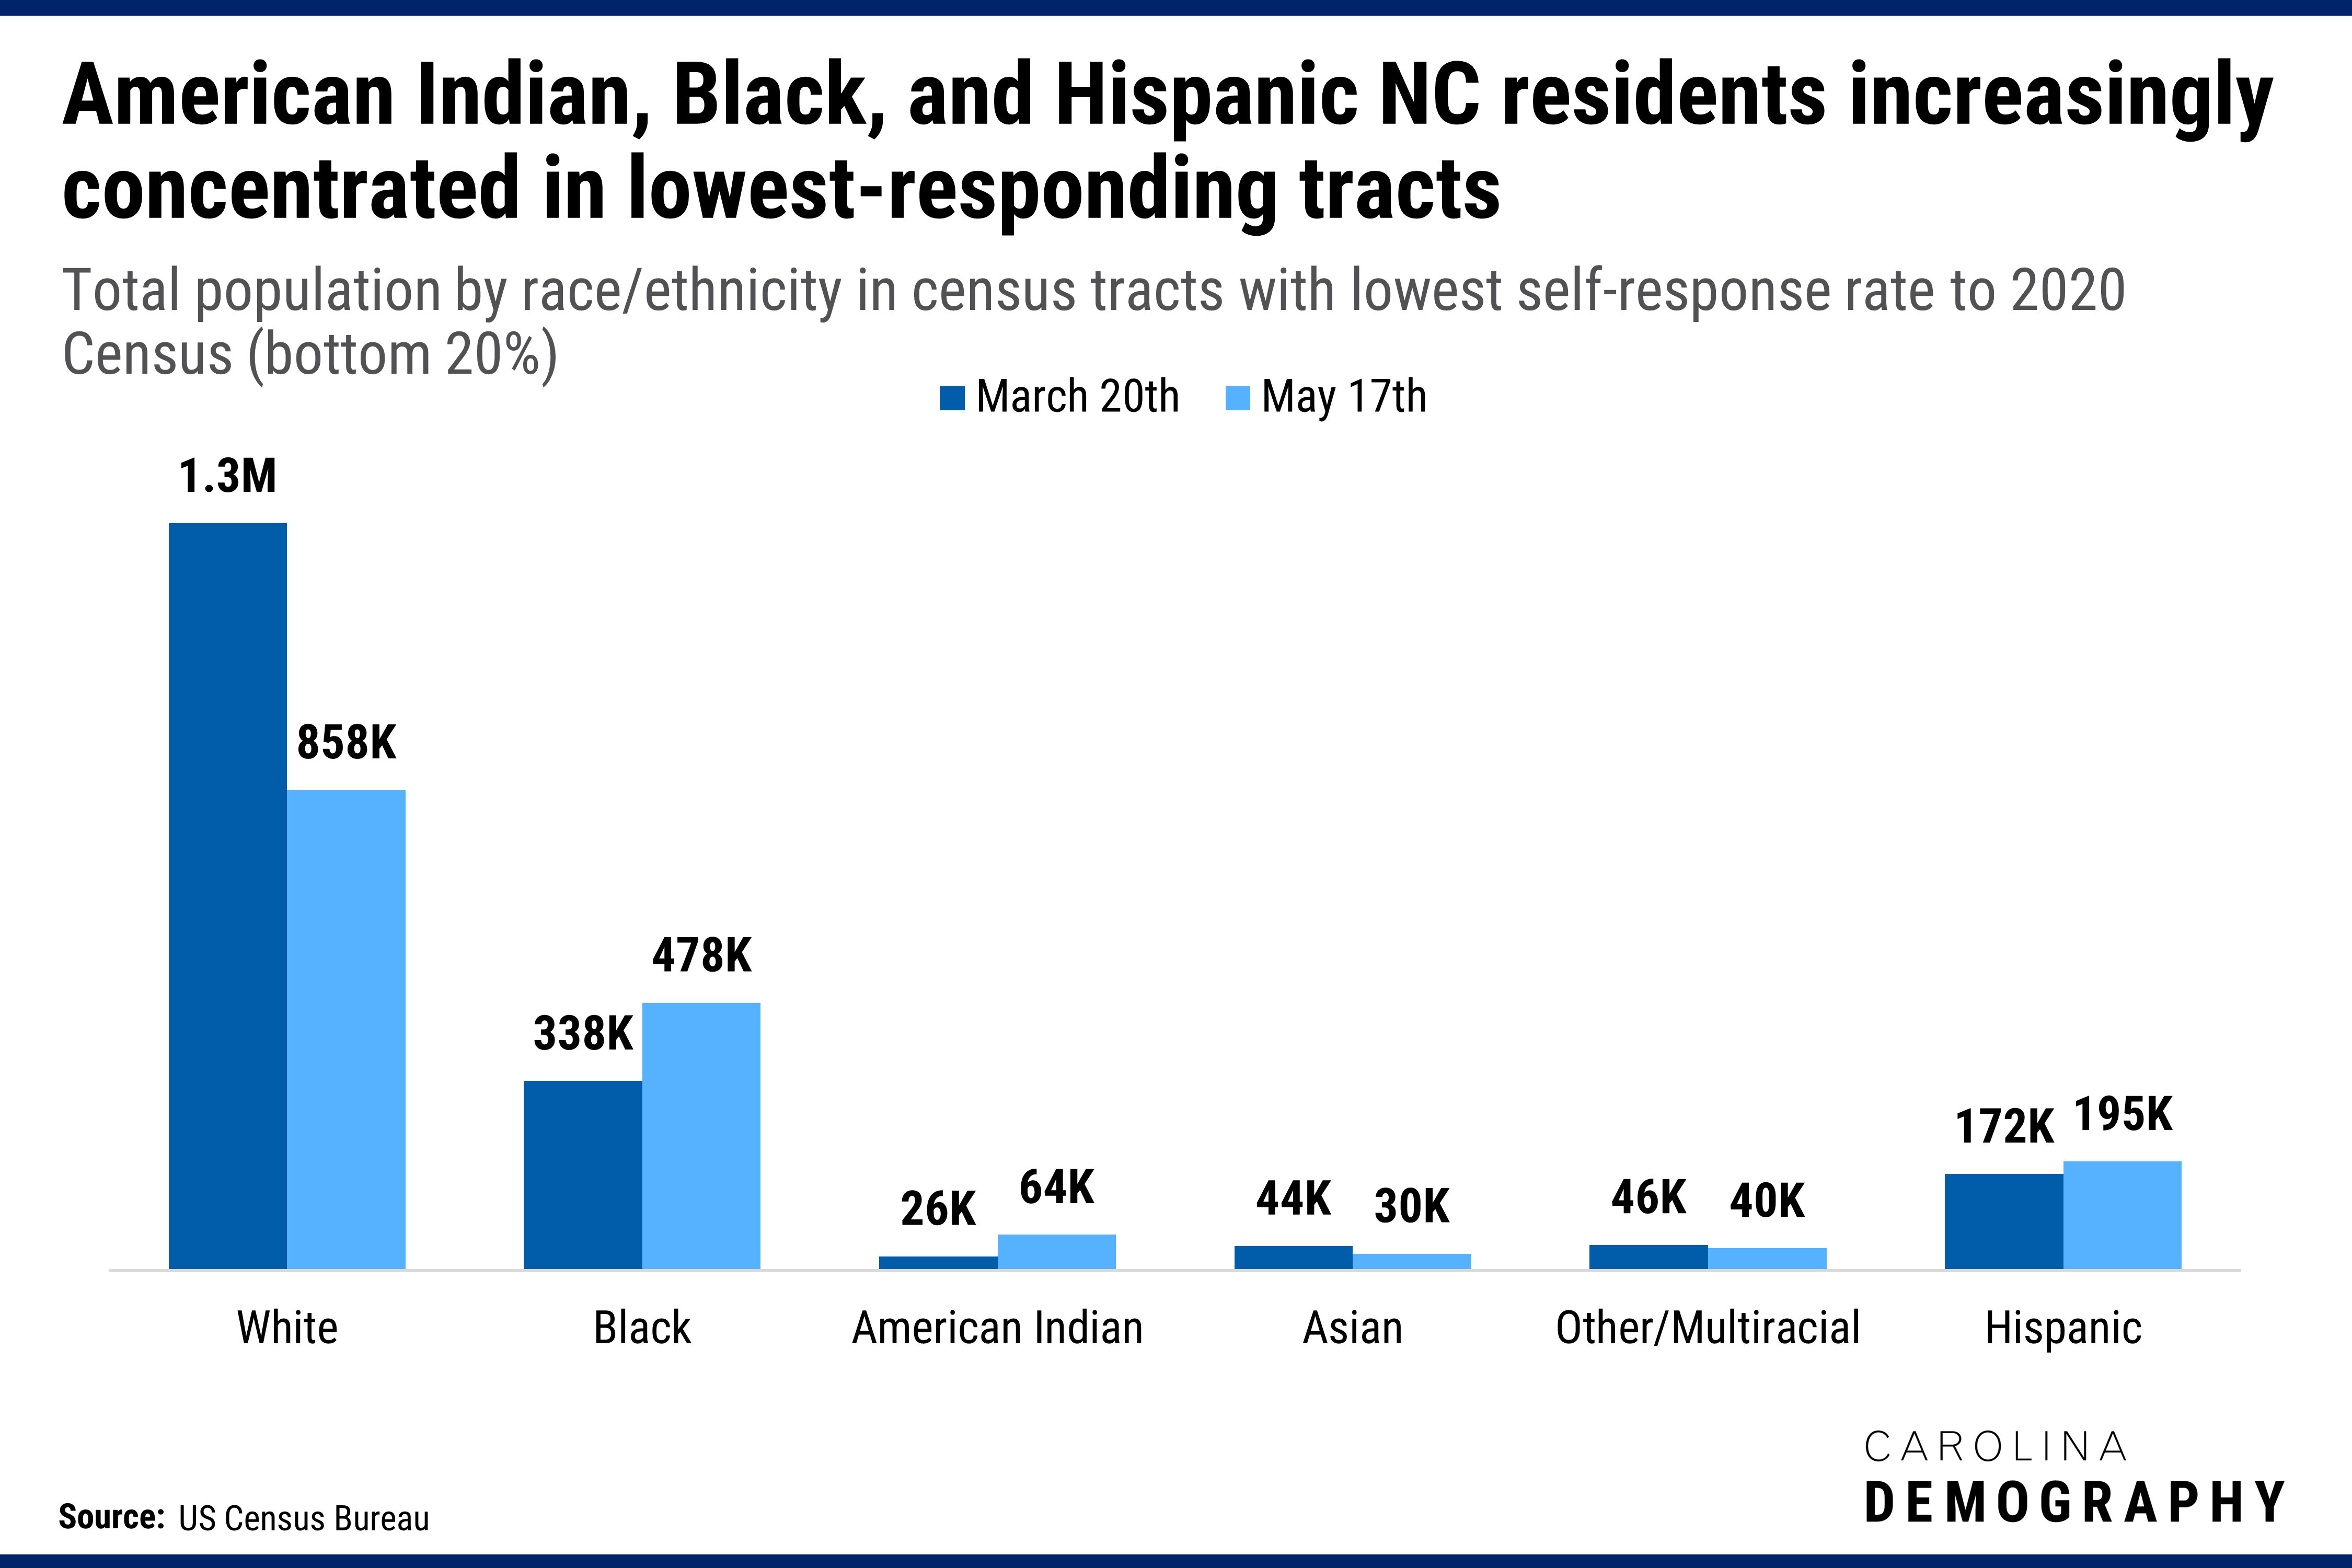 American Indian, Black, and Hispanic NC residents increasingly concentrated in lowest-responding tracts. Total population by race/ethnicity in census tracts with lowest self-response rate to 2020 Census (bottom 20%)